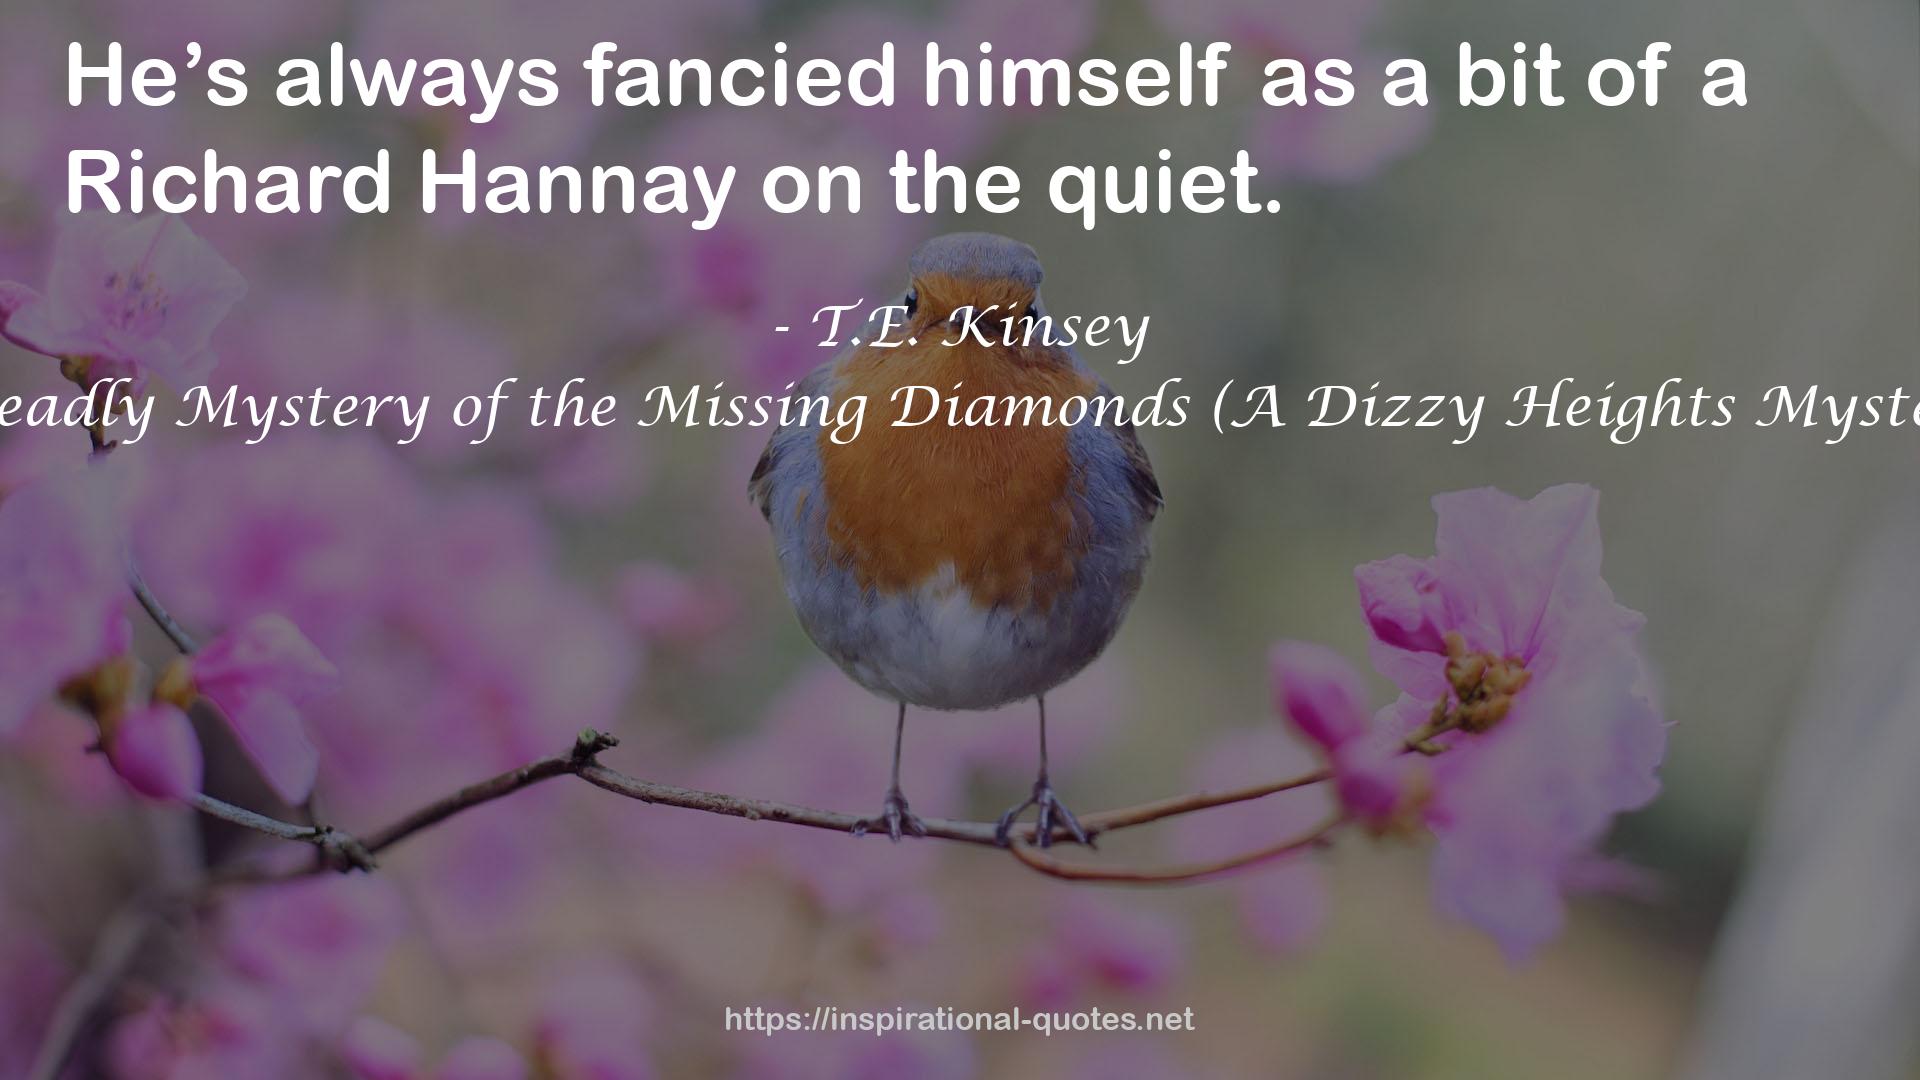 The Deadly Mystery of the Missing Diamonds (A Dizzy Heights Mystery #1) QUOTES